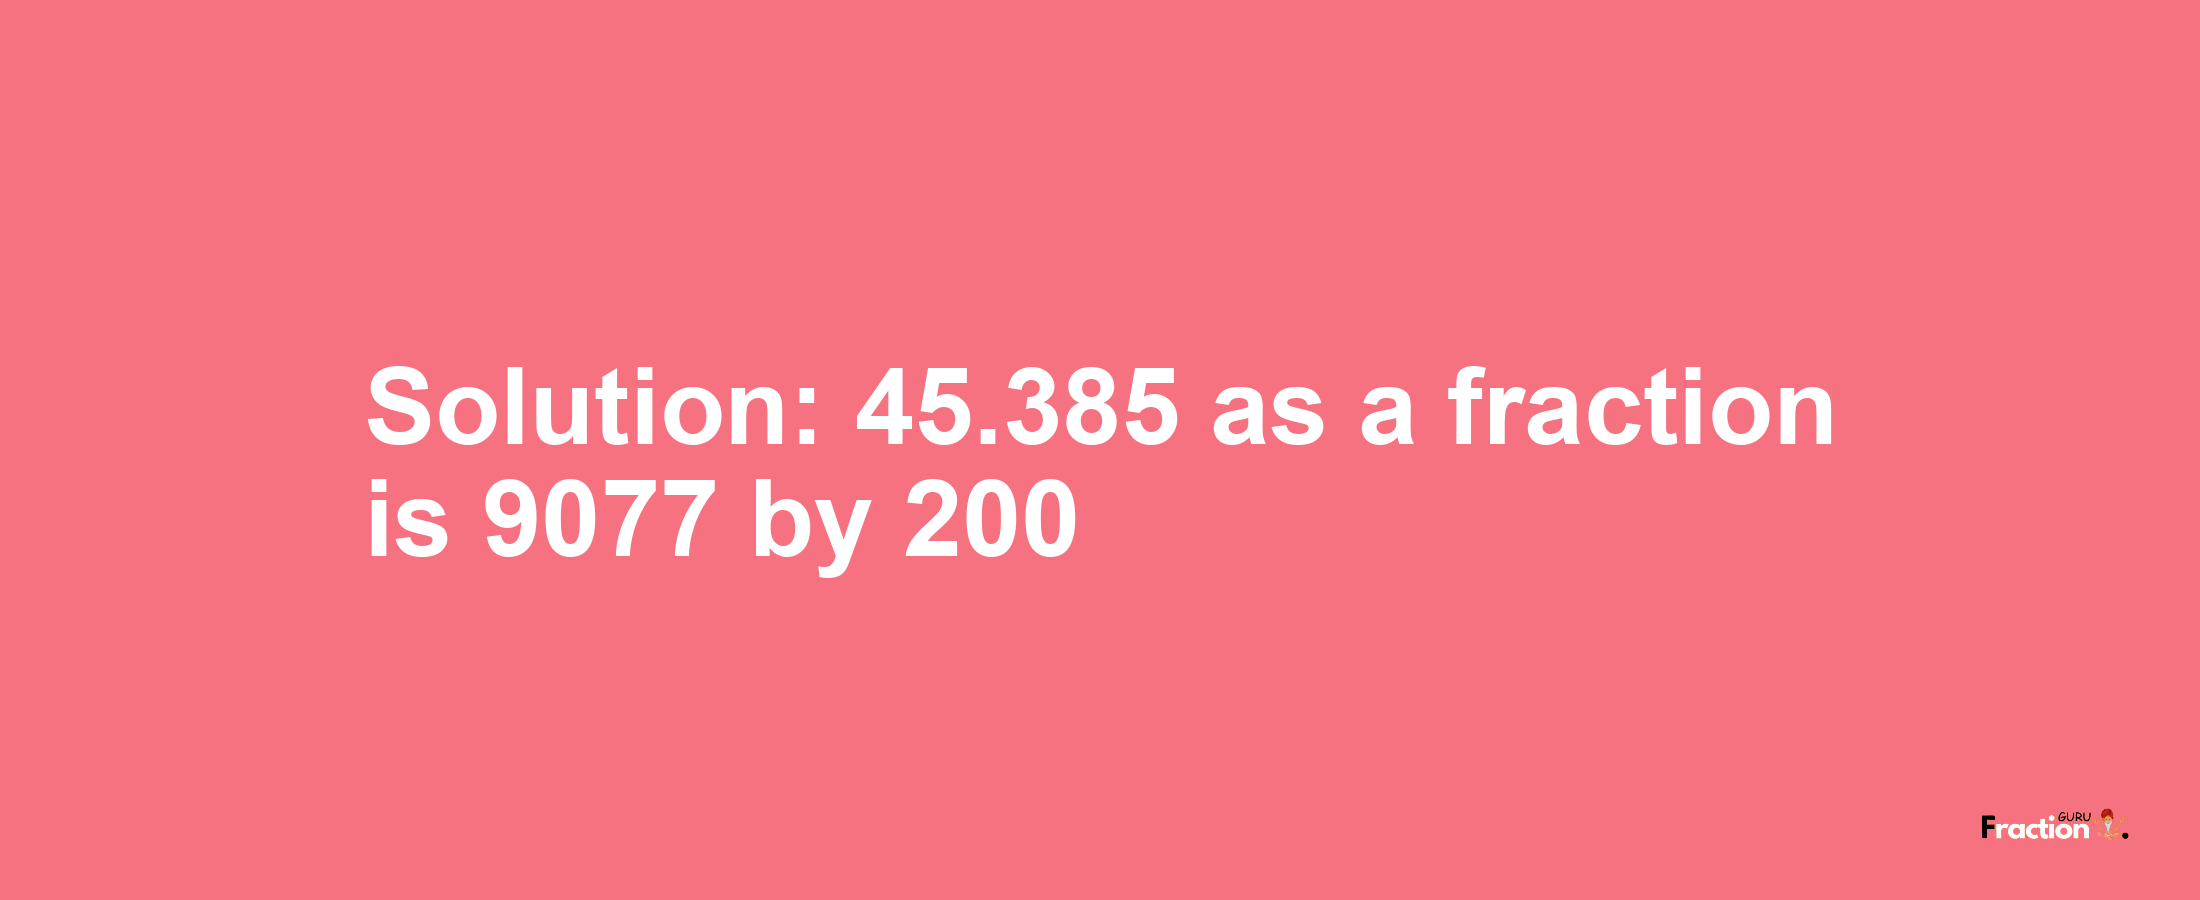 Solution:45.385 as a fraction is 9077/200